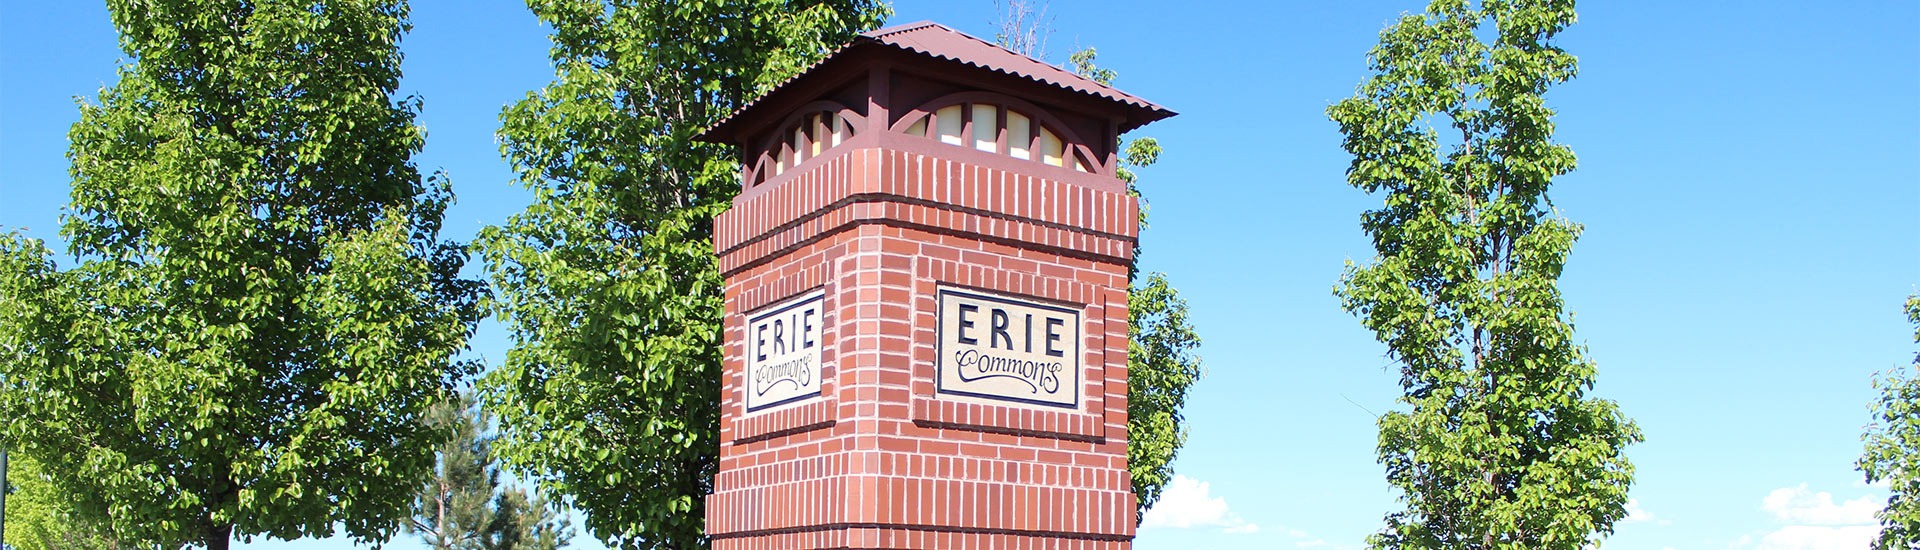 Erie Commons monument